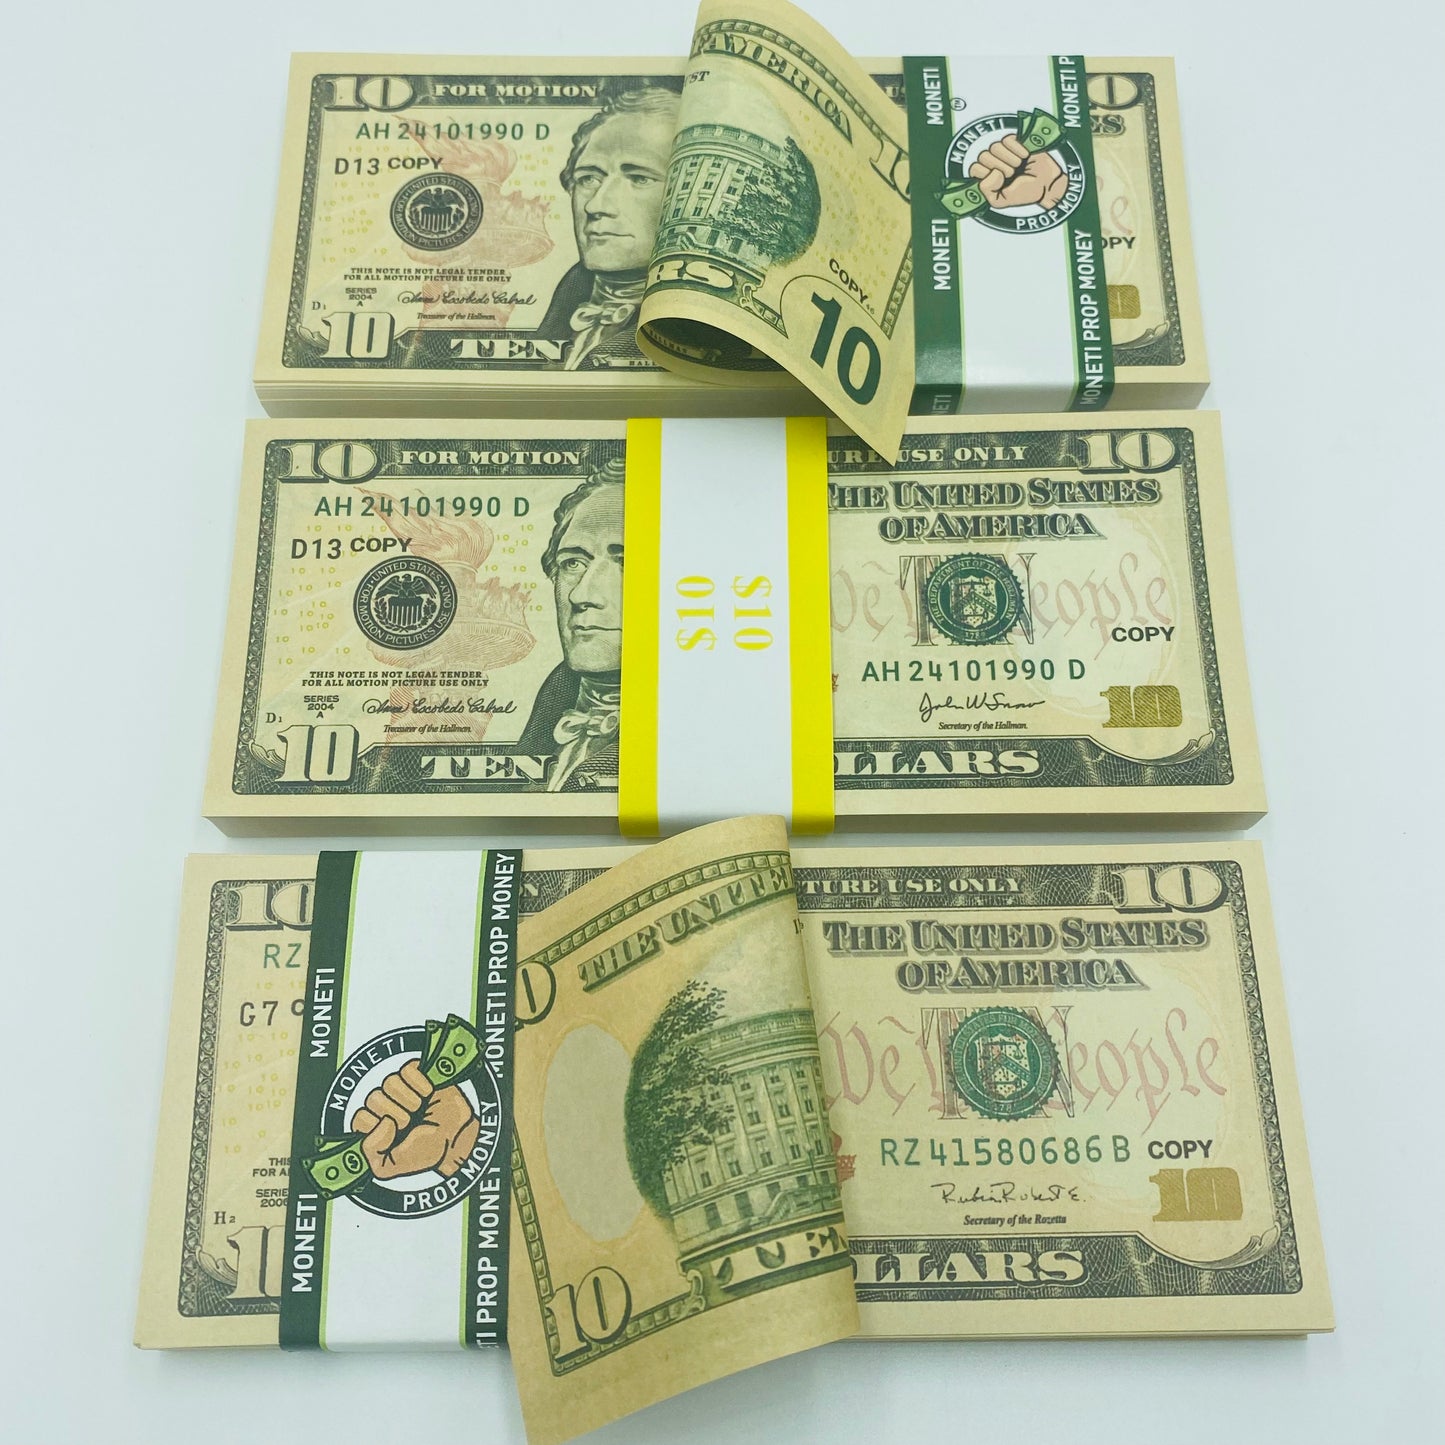 4.000 Dollar $10 Prop Money-Double Sided Full Printed Stack